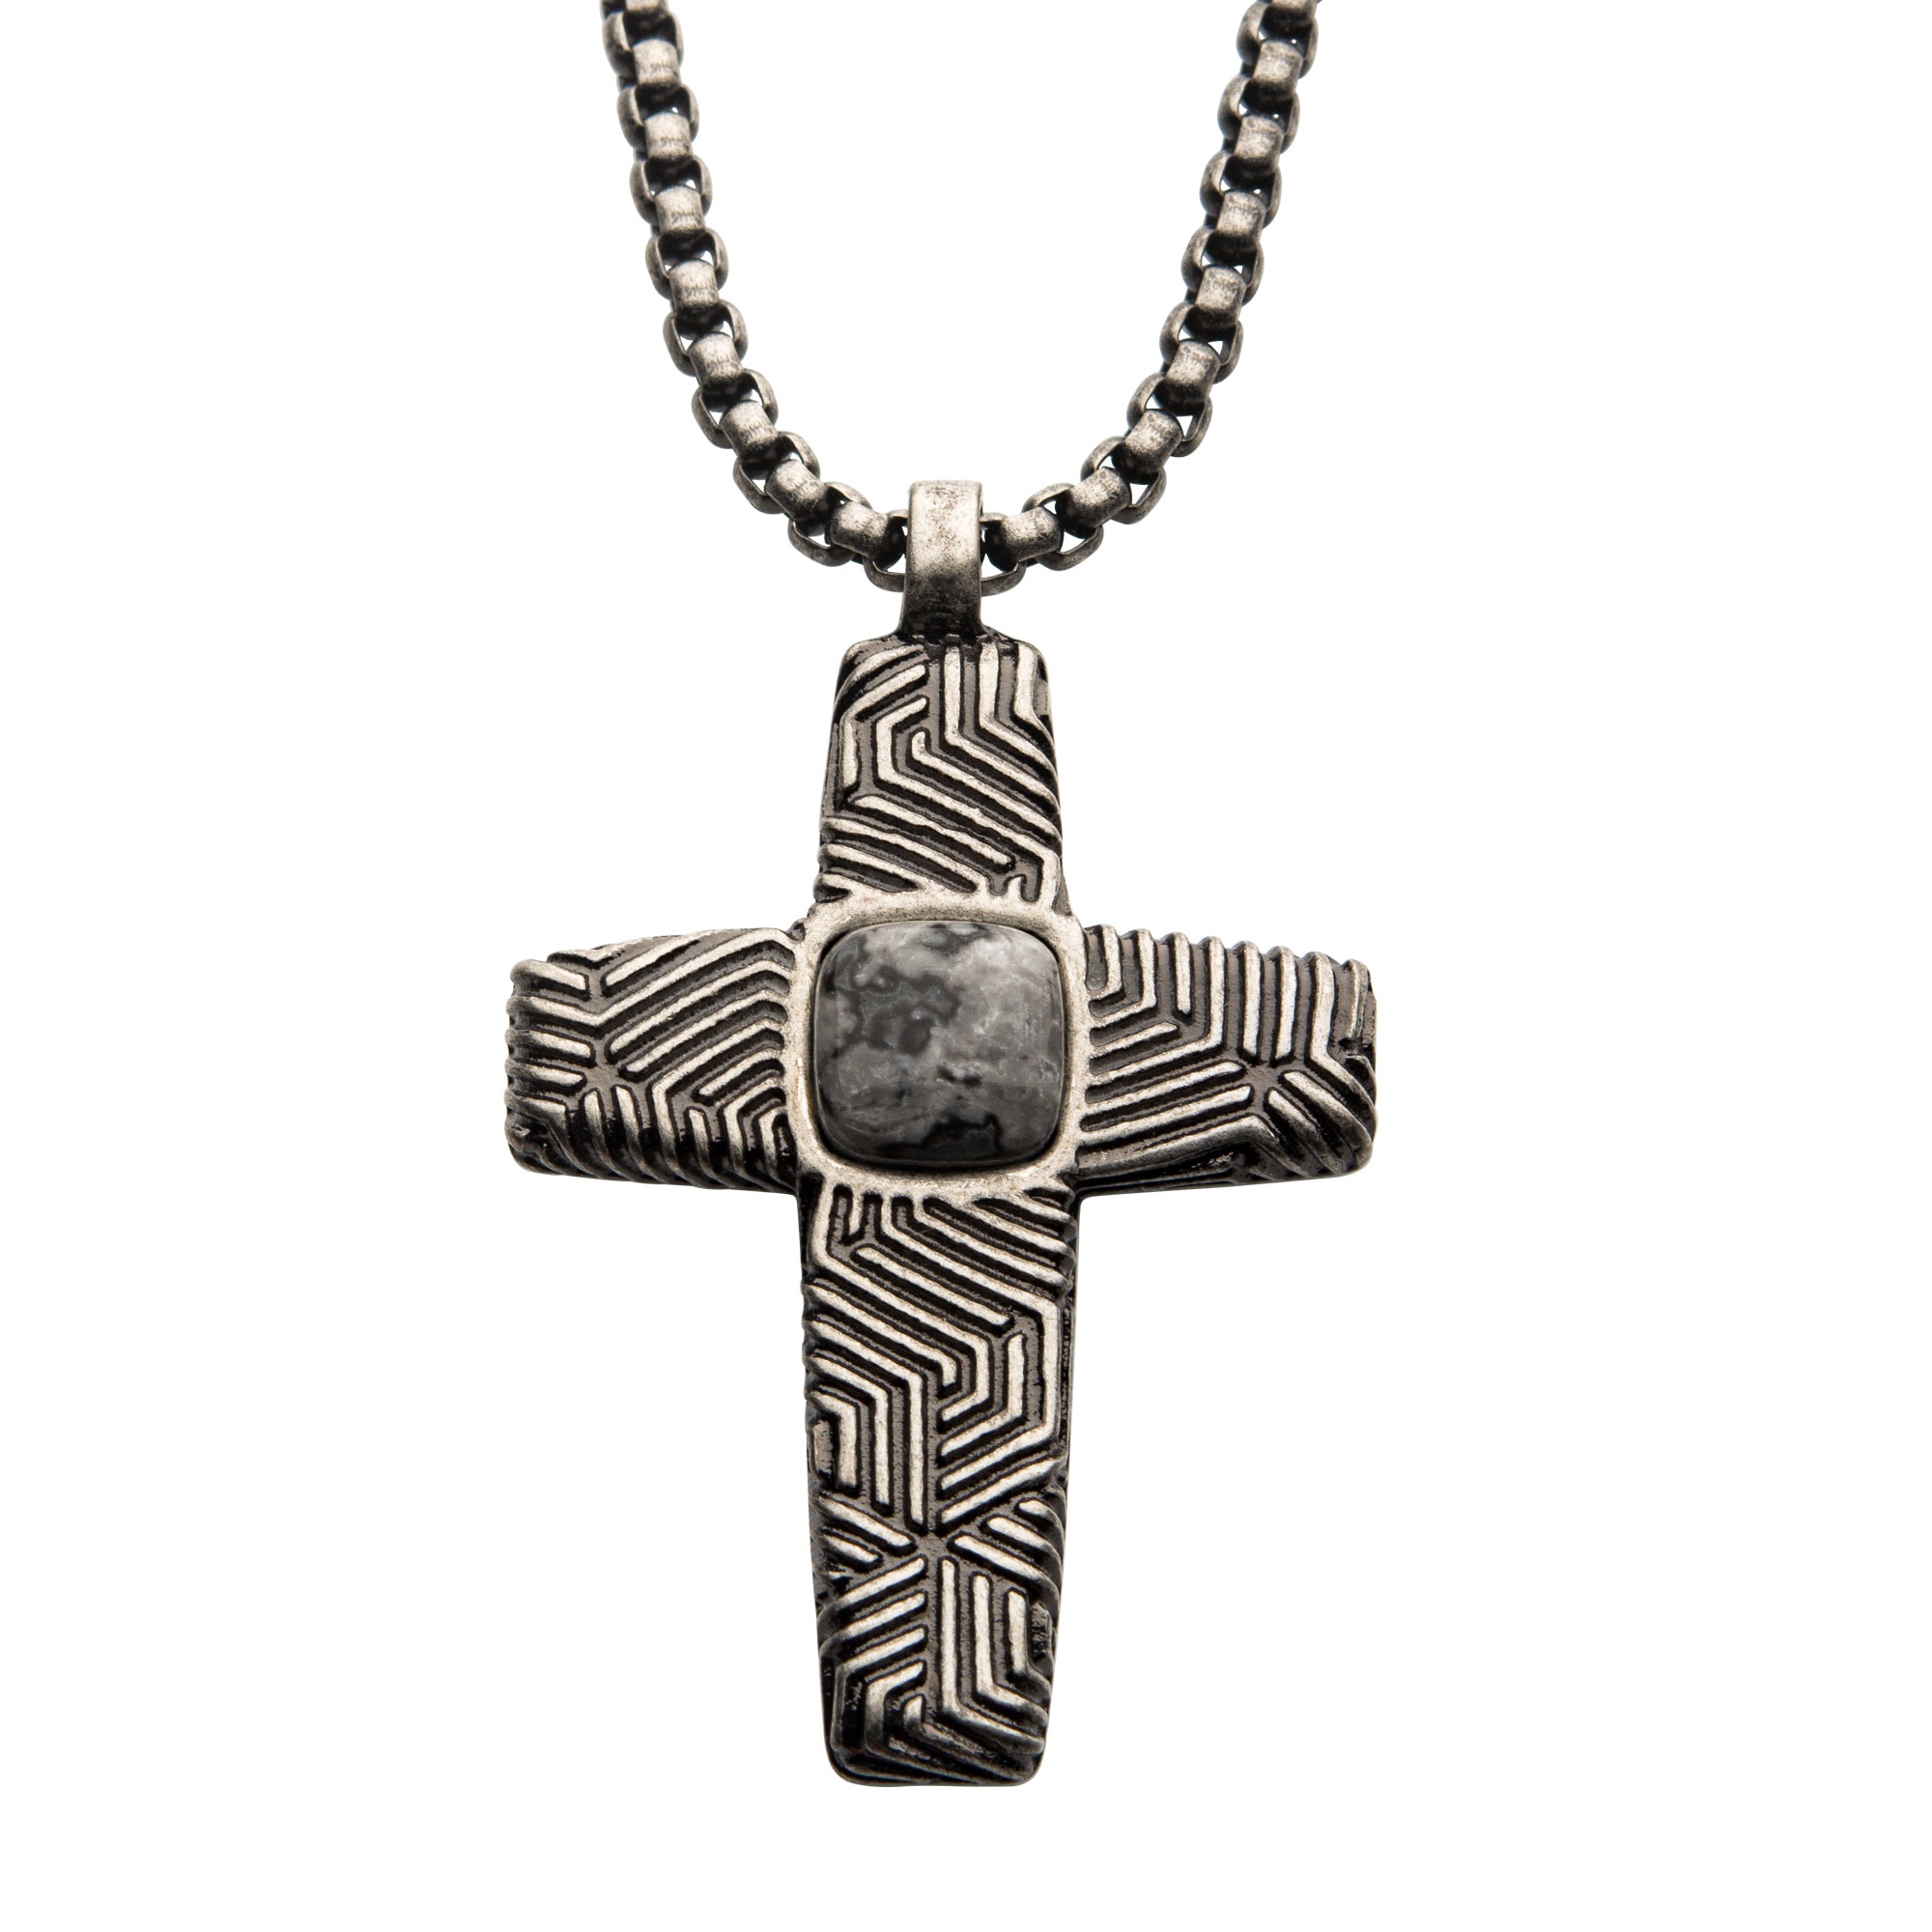 Stainless Steel Silver Plated Cross Pendant with Gray Jasper Stone, with Steel Box Chain P.K. Bennett Jewelers Mundelein, IL